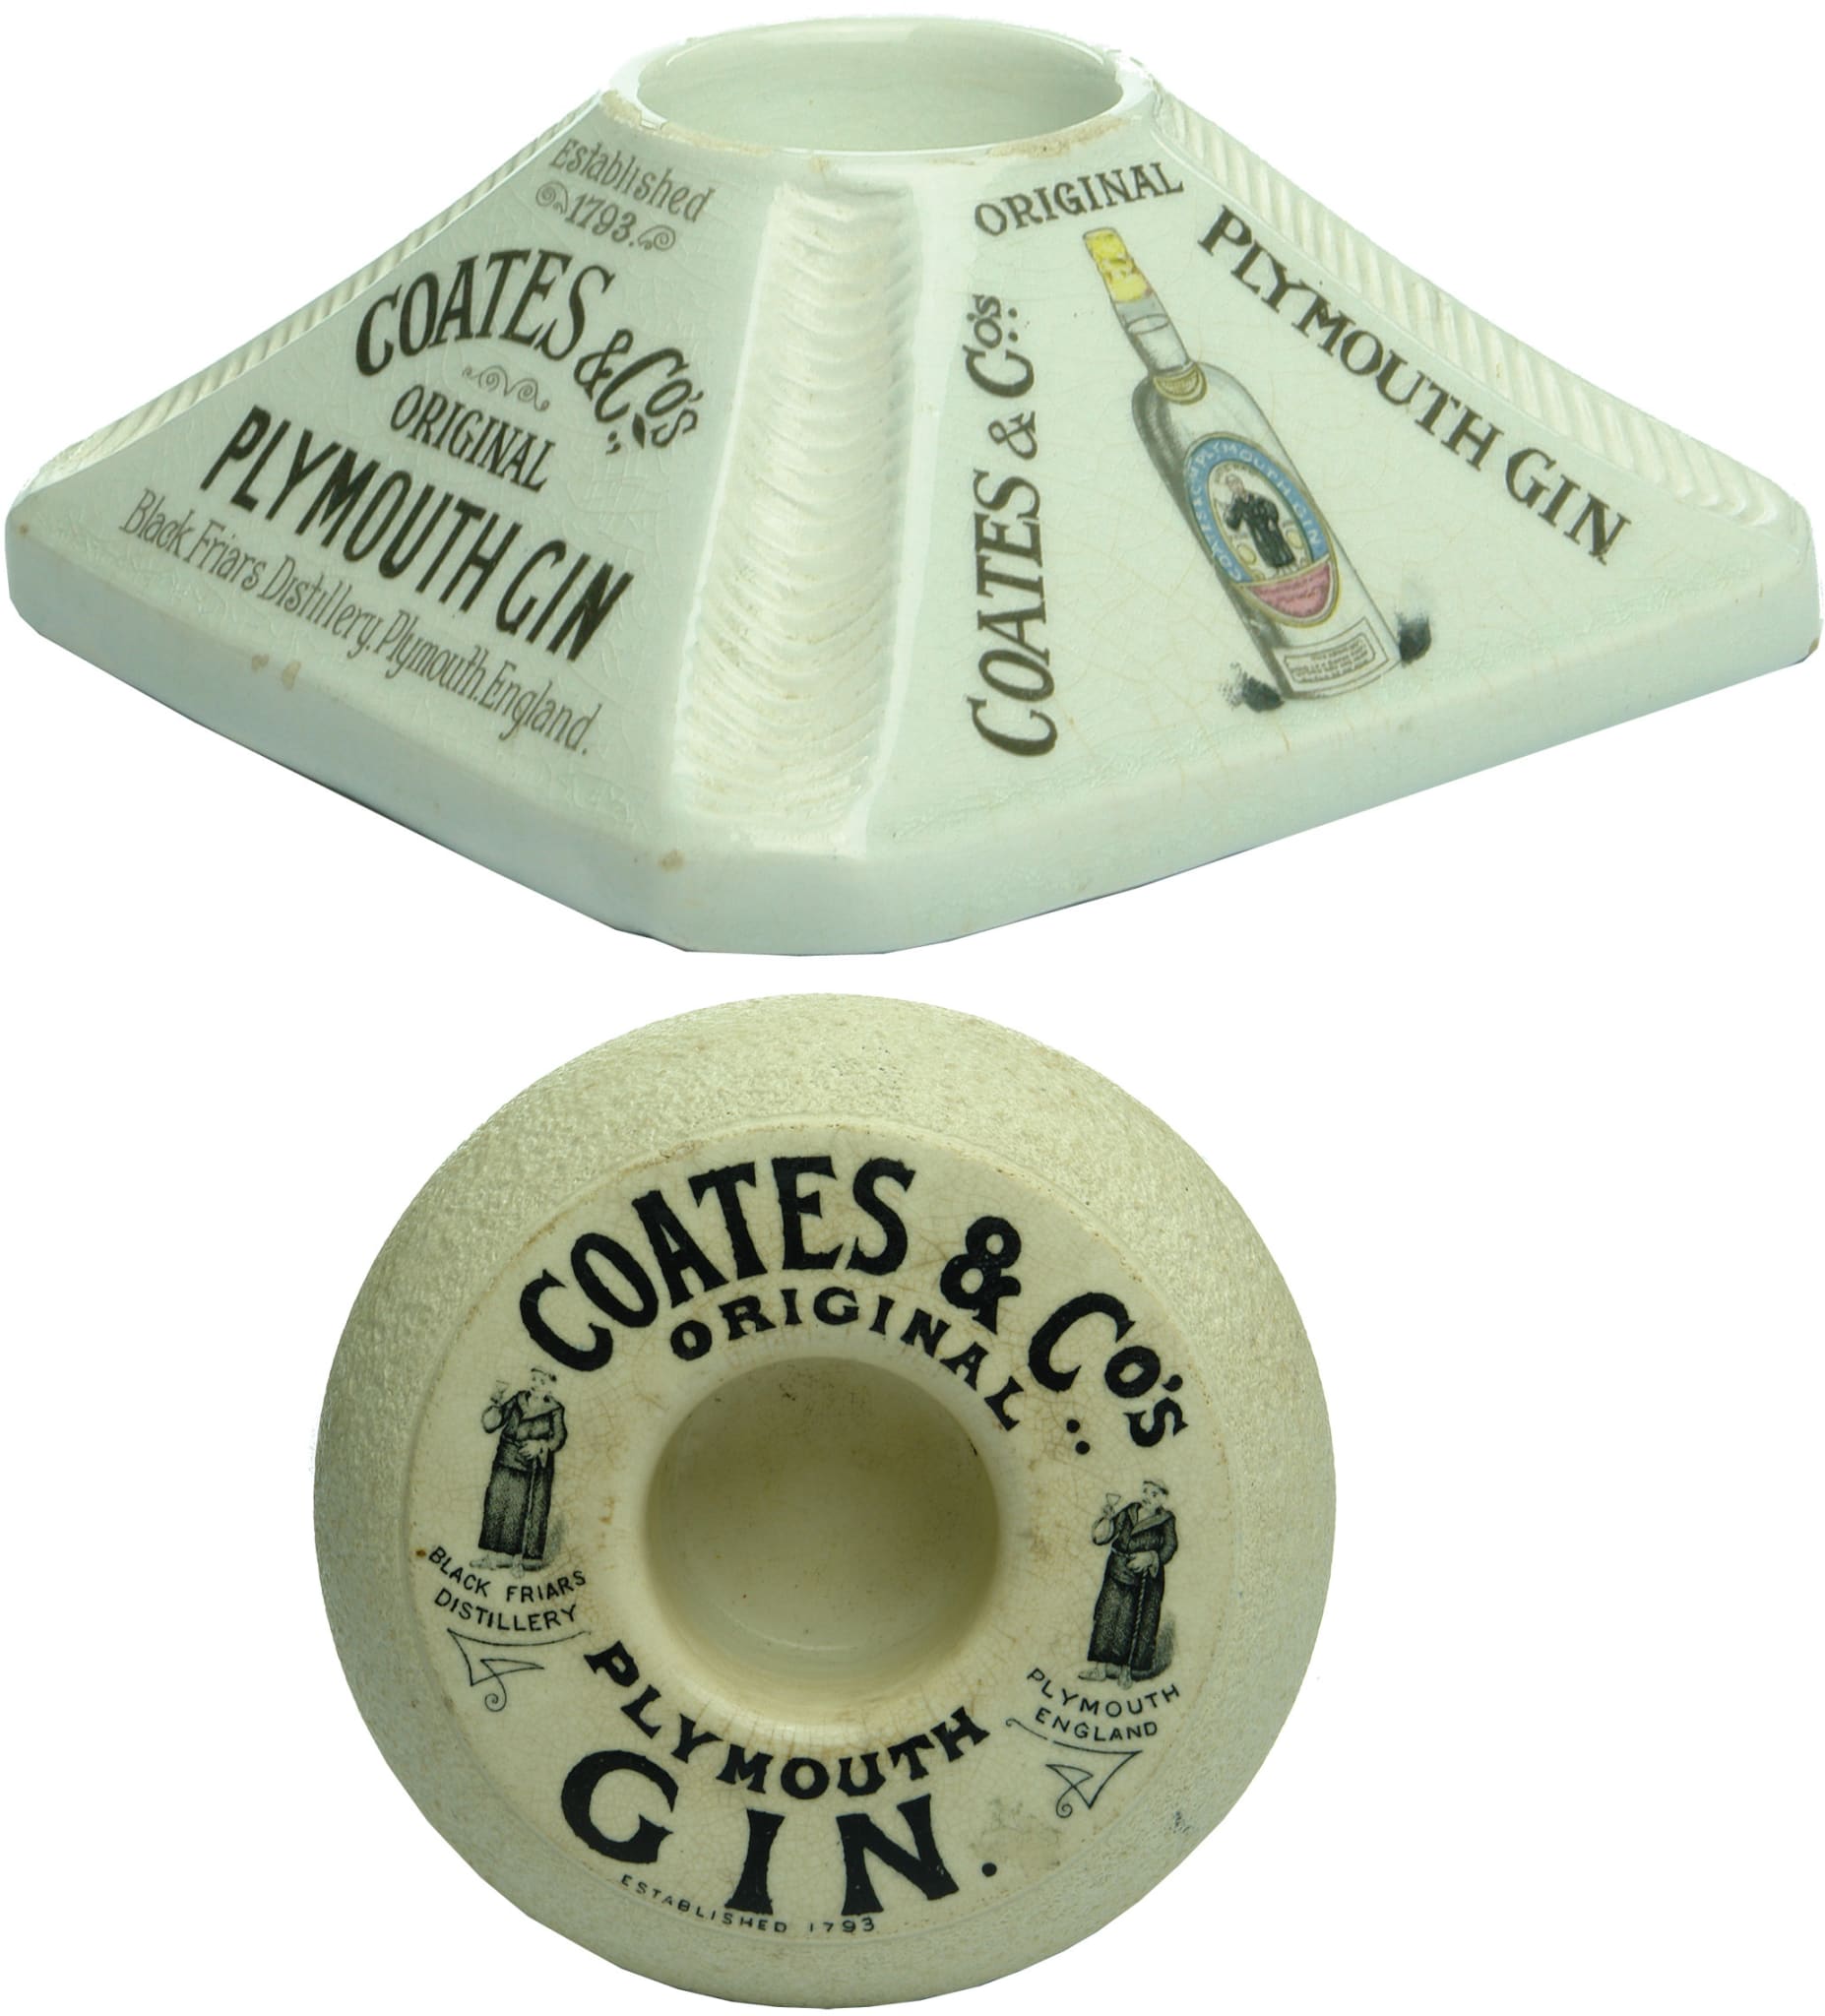 Coates Plymouth Gin Ceramic Match Strikers